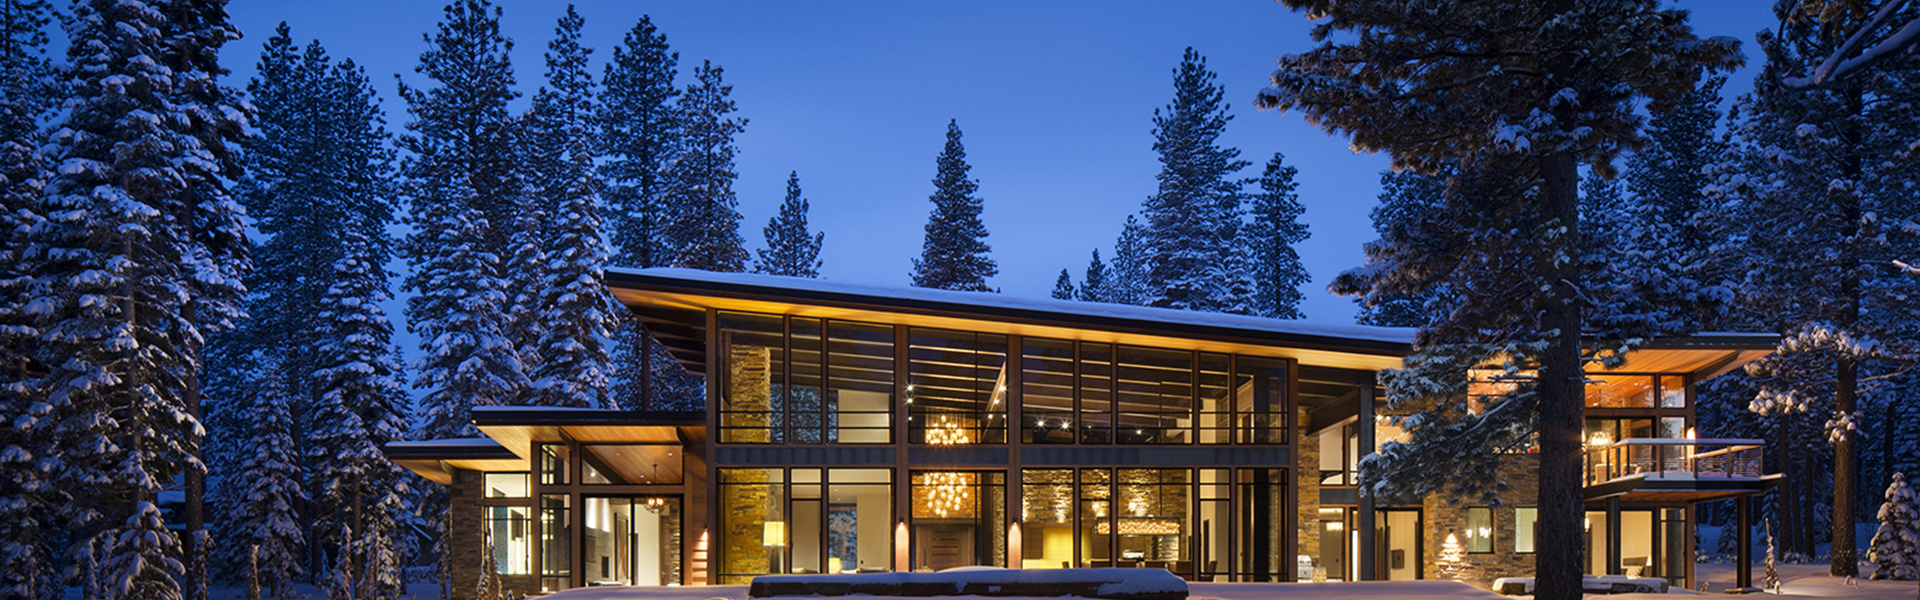 Smart home installation by RAC Advanced Control for Truckee